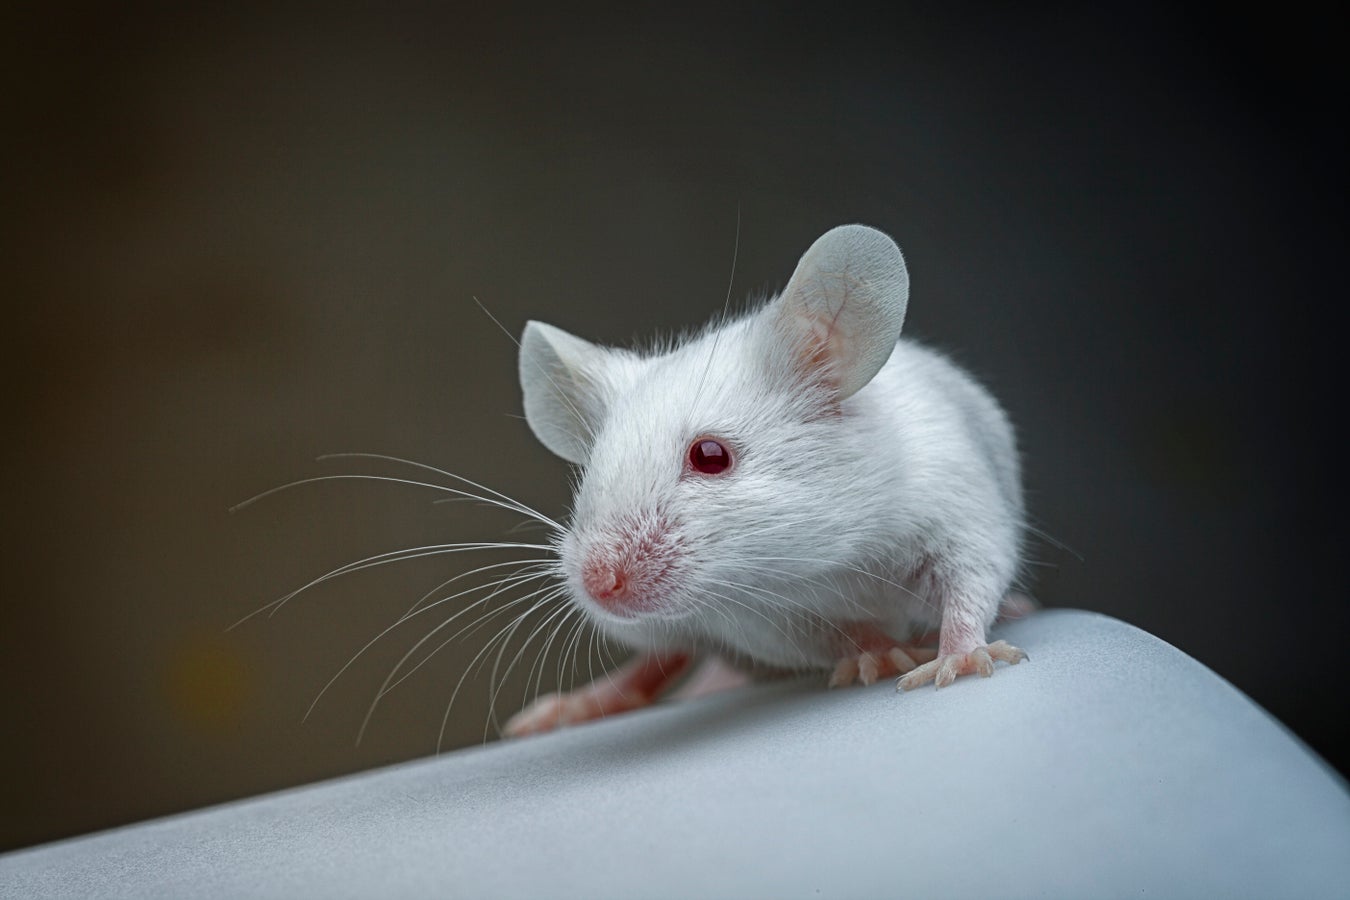 First Atlas of Every Mouse Brain Cell Could Improve Neuro Disease Treatments